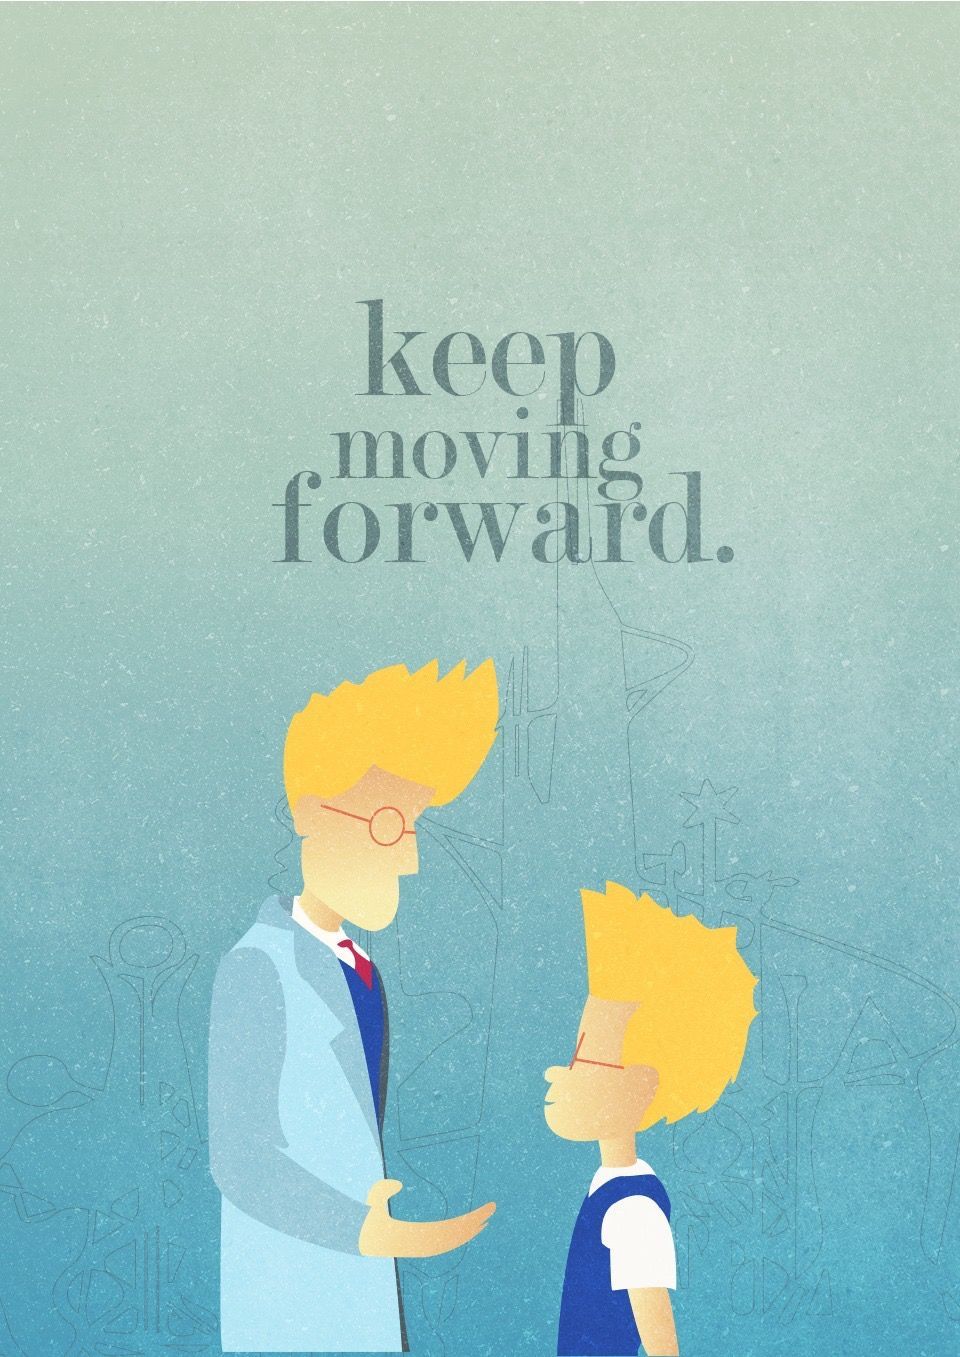 Pin By Emory Frie On Disney Cartoon Wallpaper. Meet The Robinson, Disney Quotes, Meet The Robinsons Quote